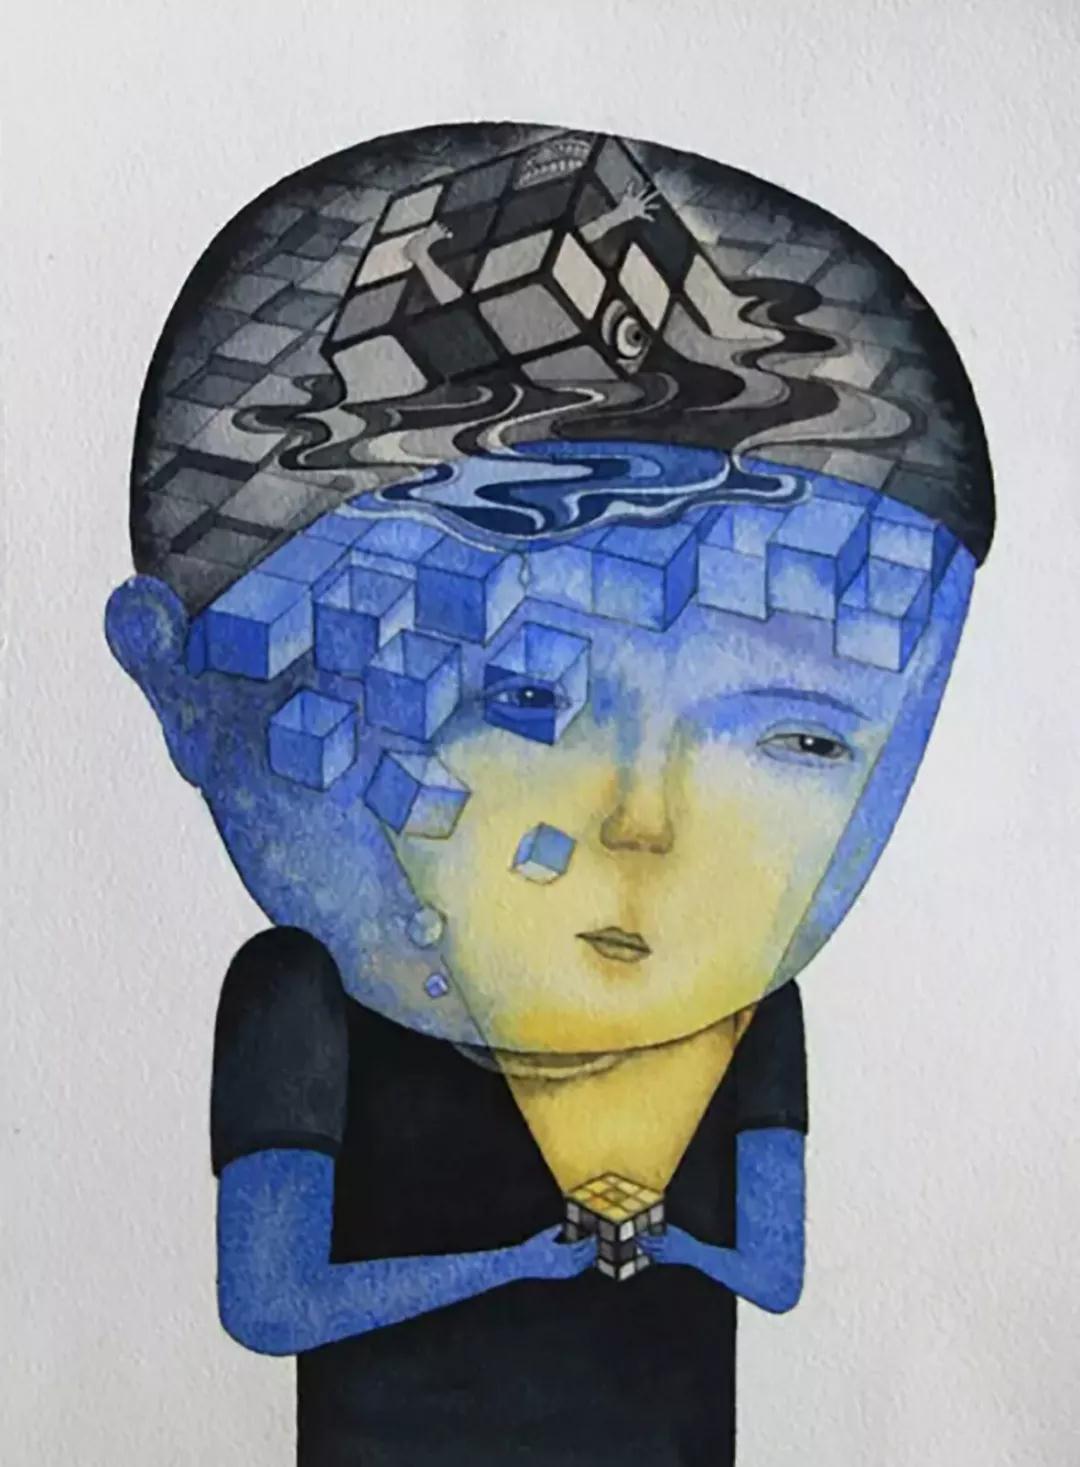 Illustrator Zou Liangping Explores the Worlds Within Our Heads